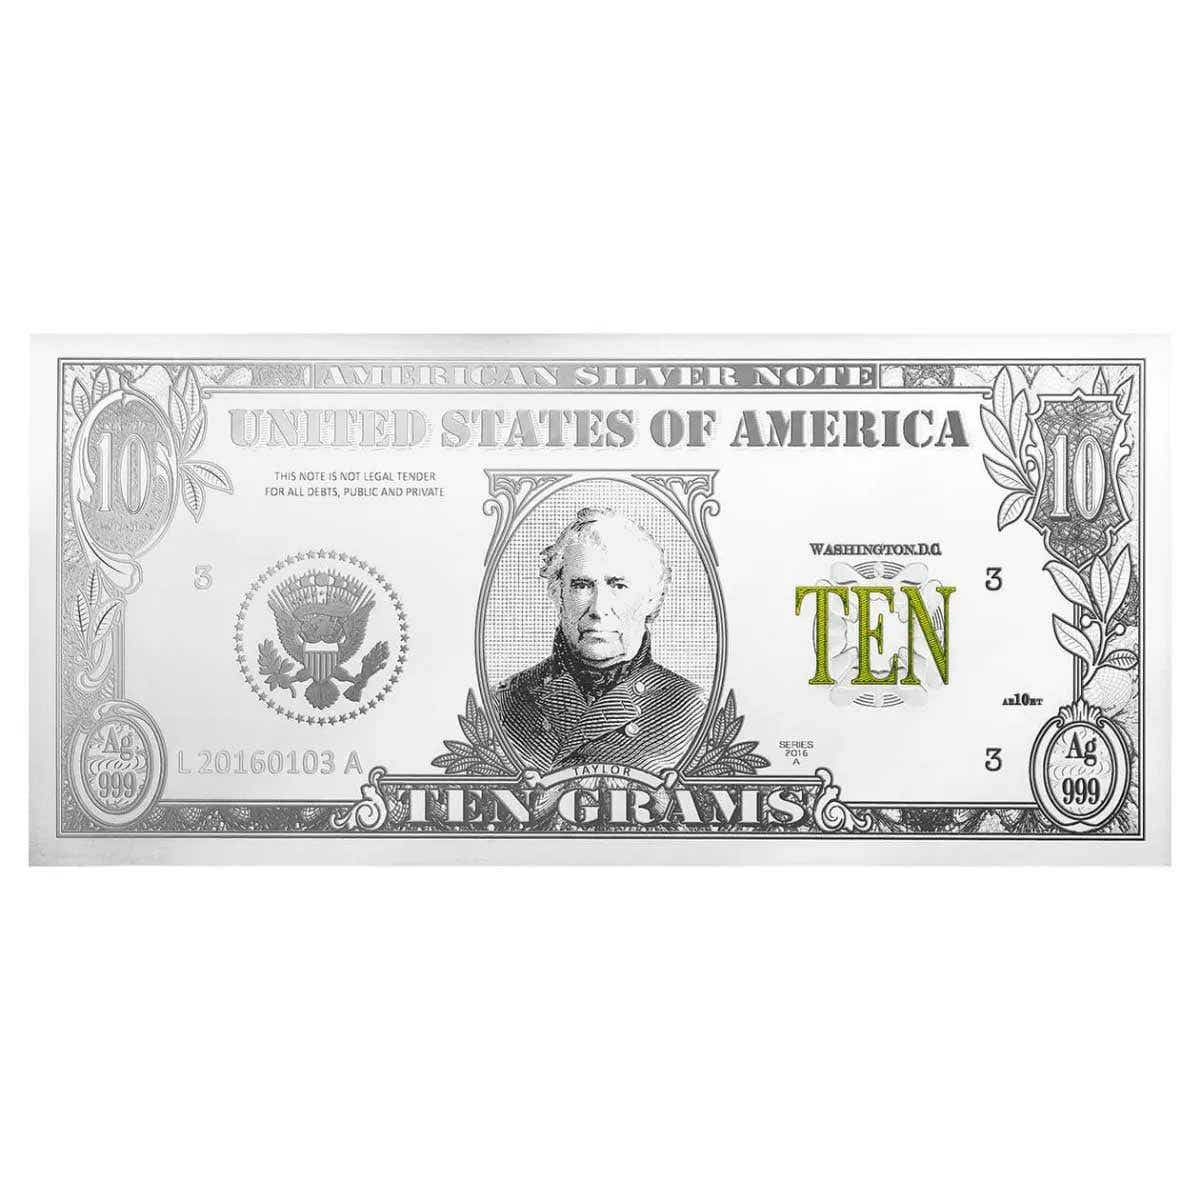 American Silver Notes Zachary Taylor $10 Banknote